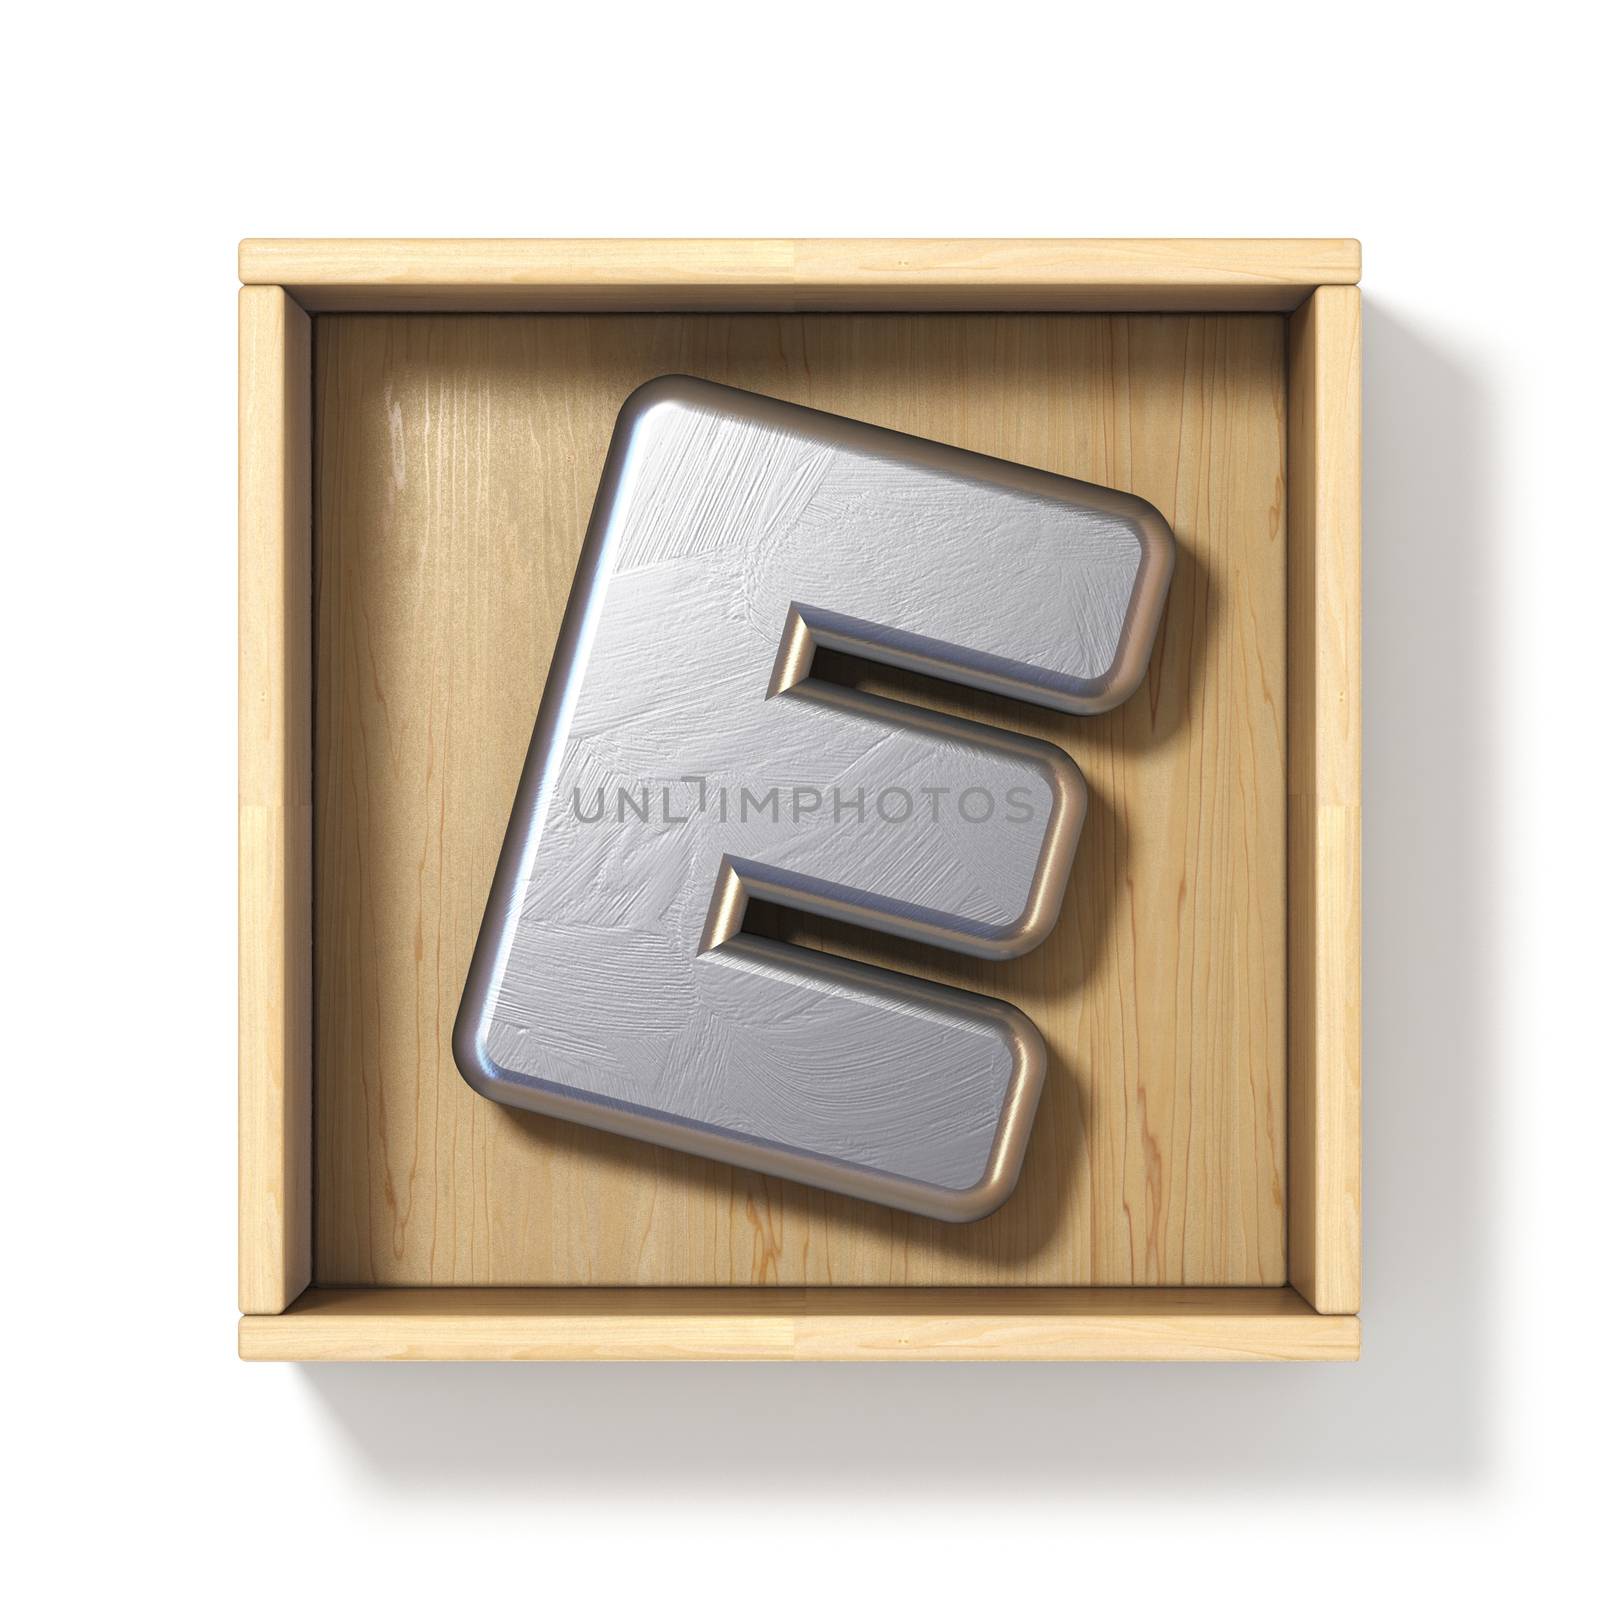 Silver metal letter E in wooden box 3D render illustration isolated on white background